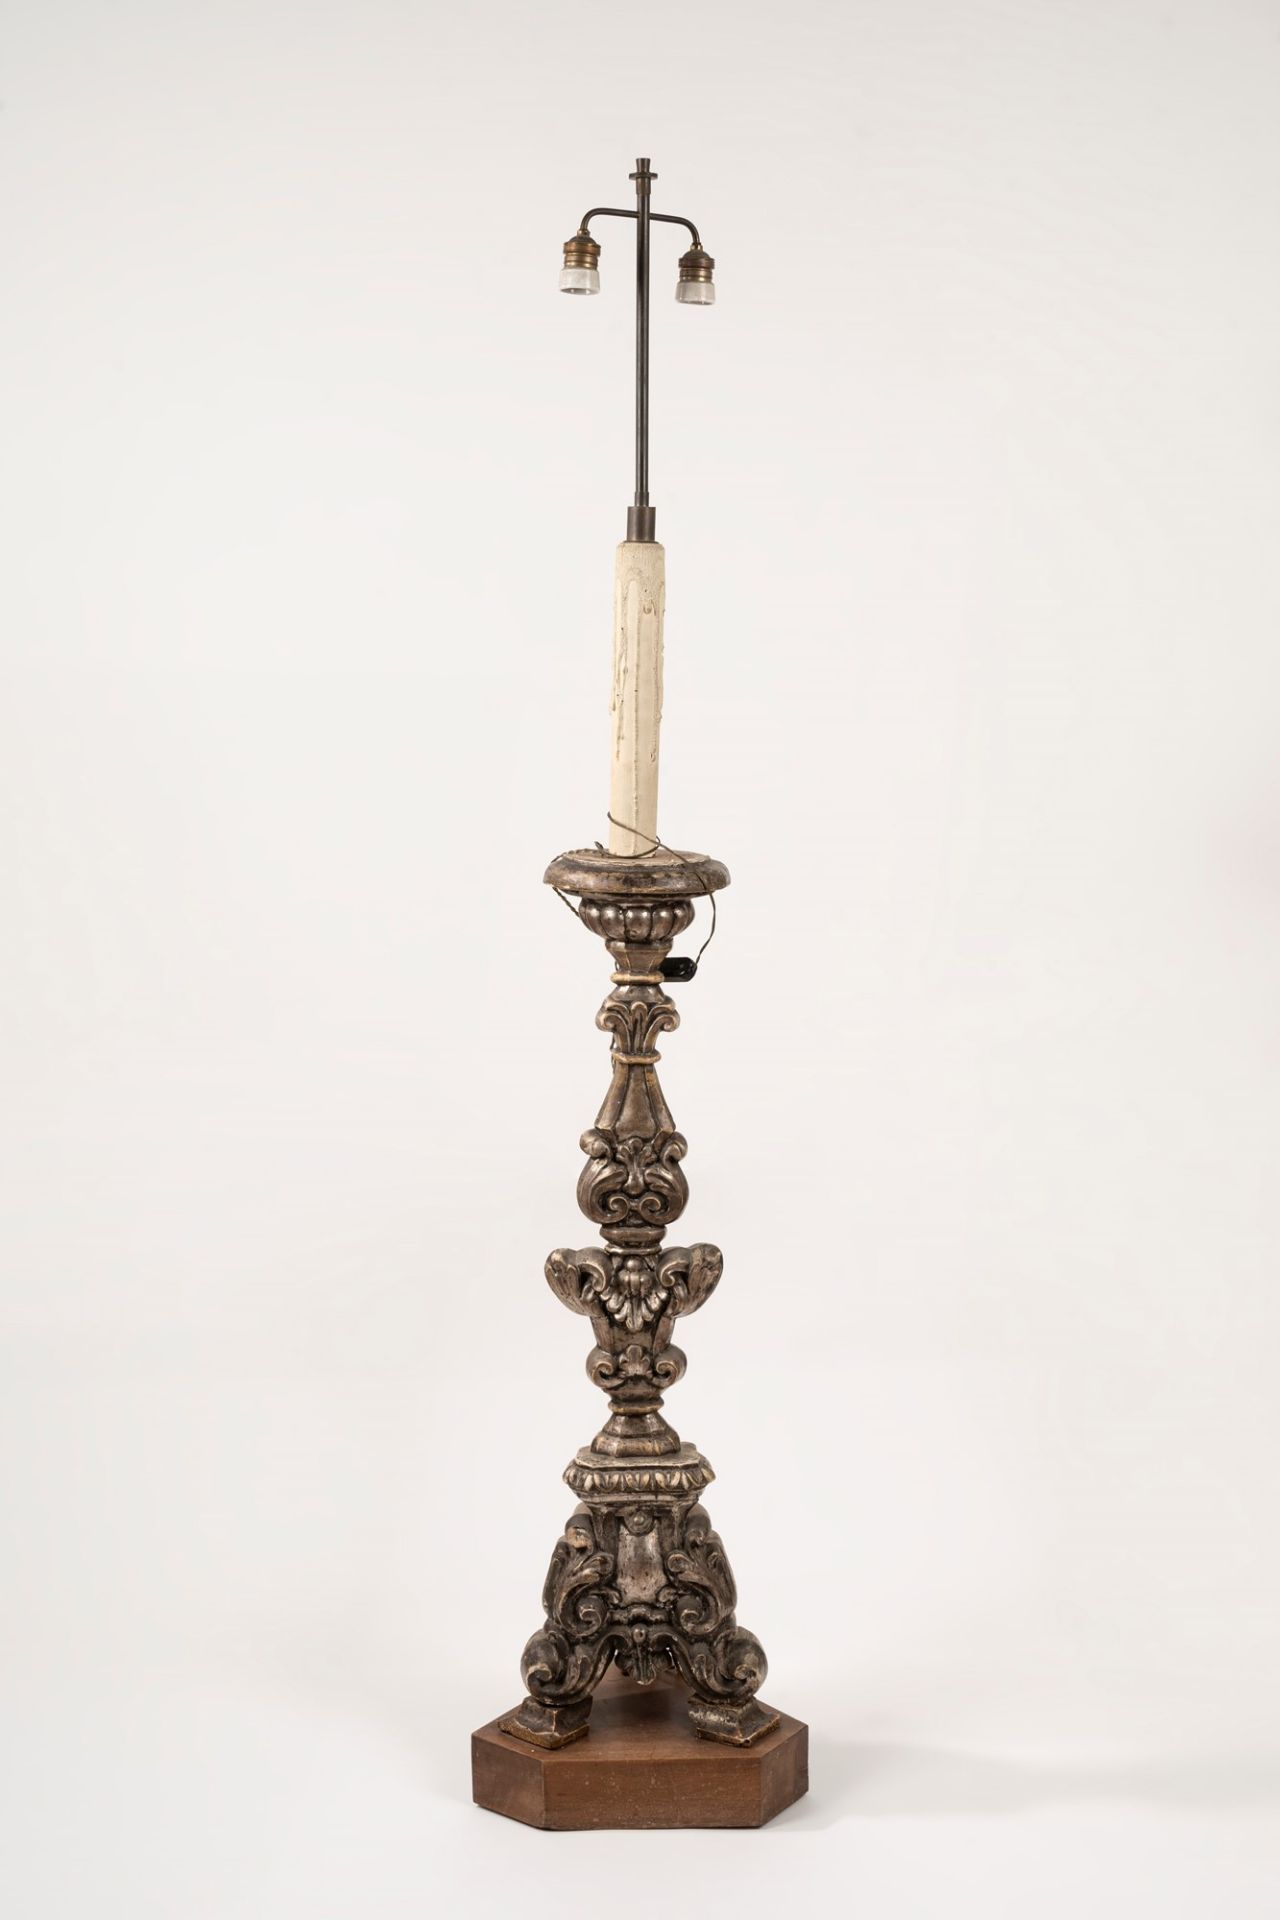 Torch holders in lacquered wood and mecca, 18th century